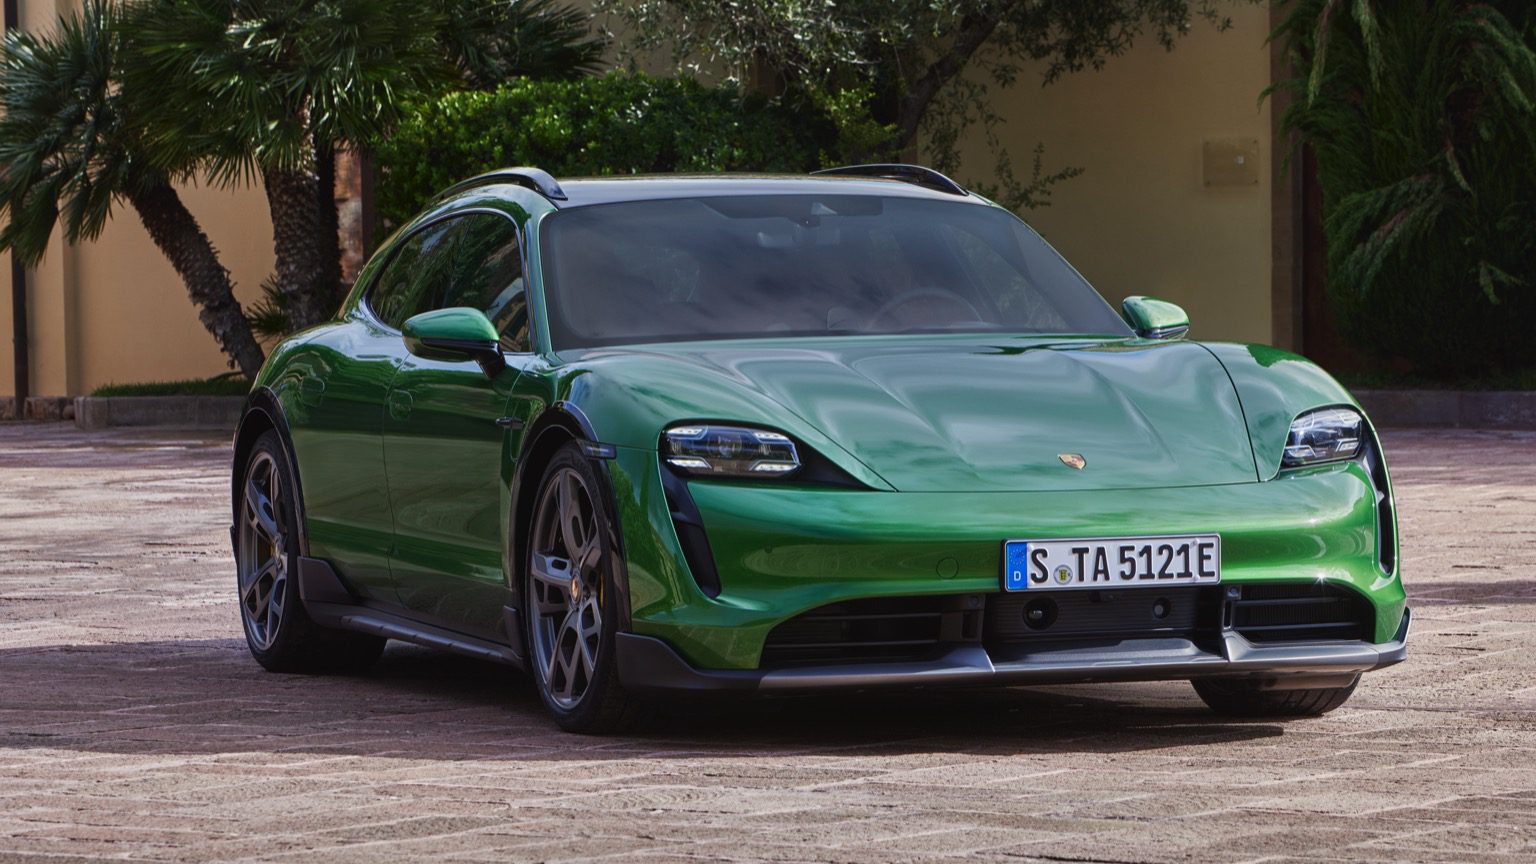 Front-angled view of a green Porsche Taycan Turbo Cross Turismo